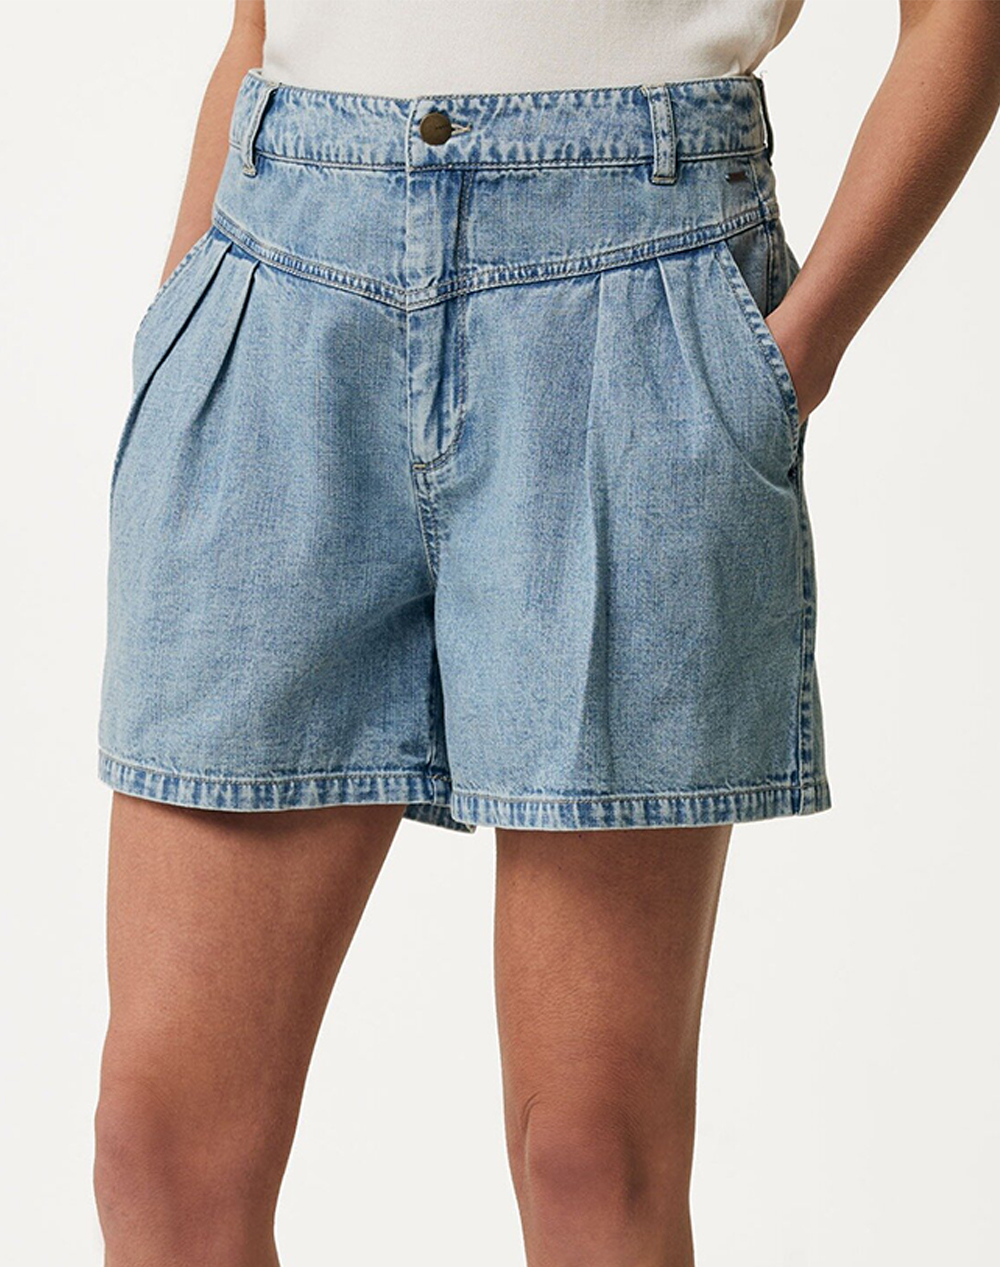 MEXX Denim shorts with detail in front MF006204541W-50069 JeanBlue 3810PMEXX2400006_XR31486